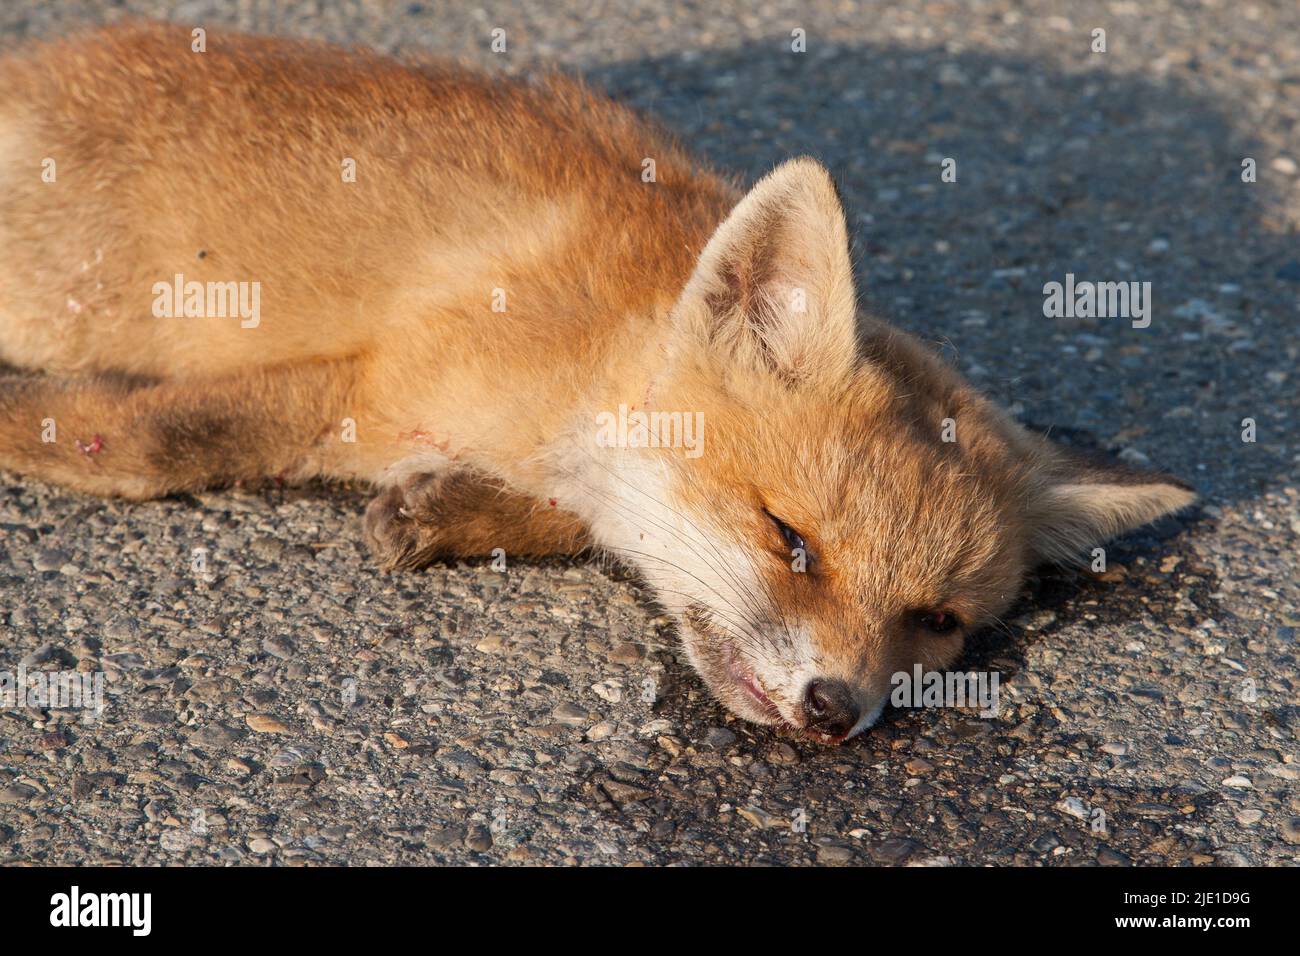 A sad sight on the side of the road, a young fox run over. The roads in Europe are a battlefield where 30 million mammals die every year from traffic. Stock Photo